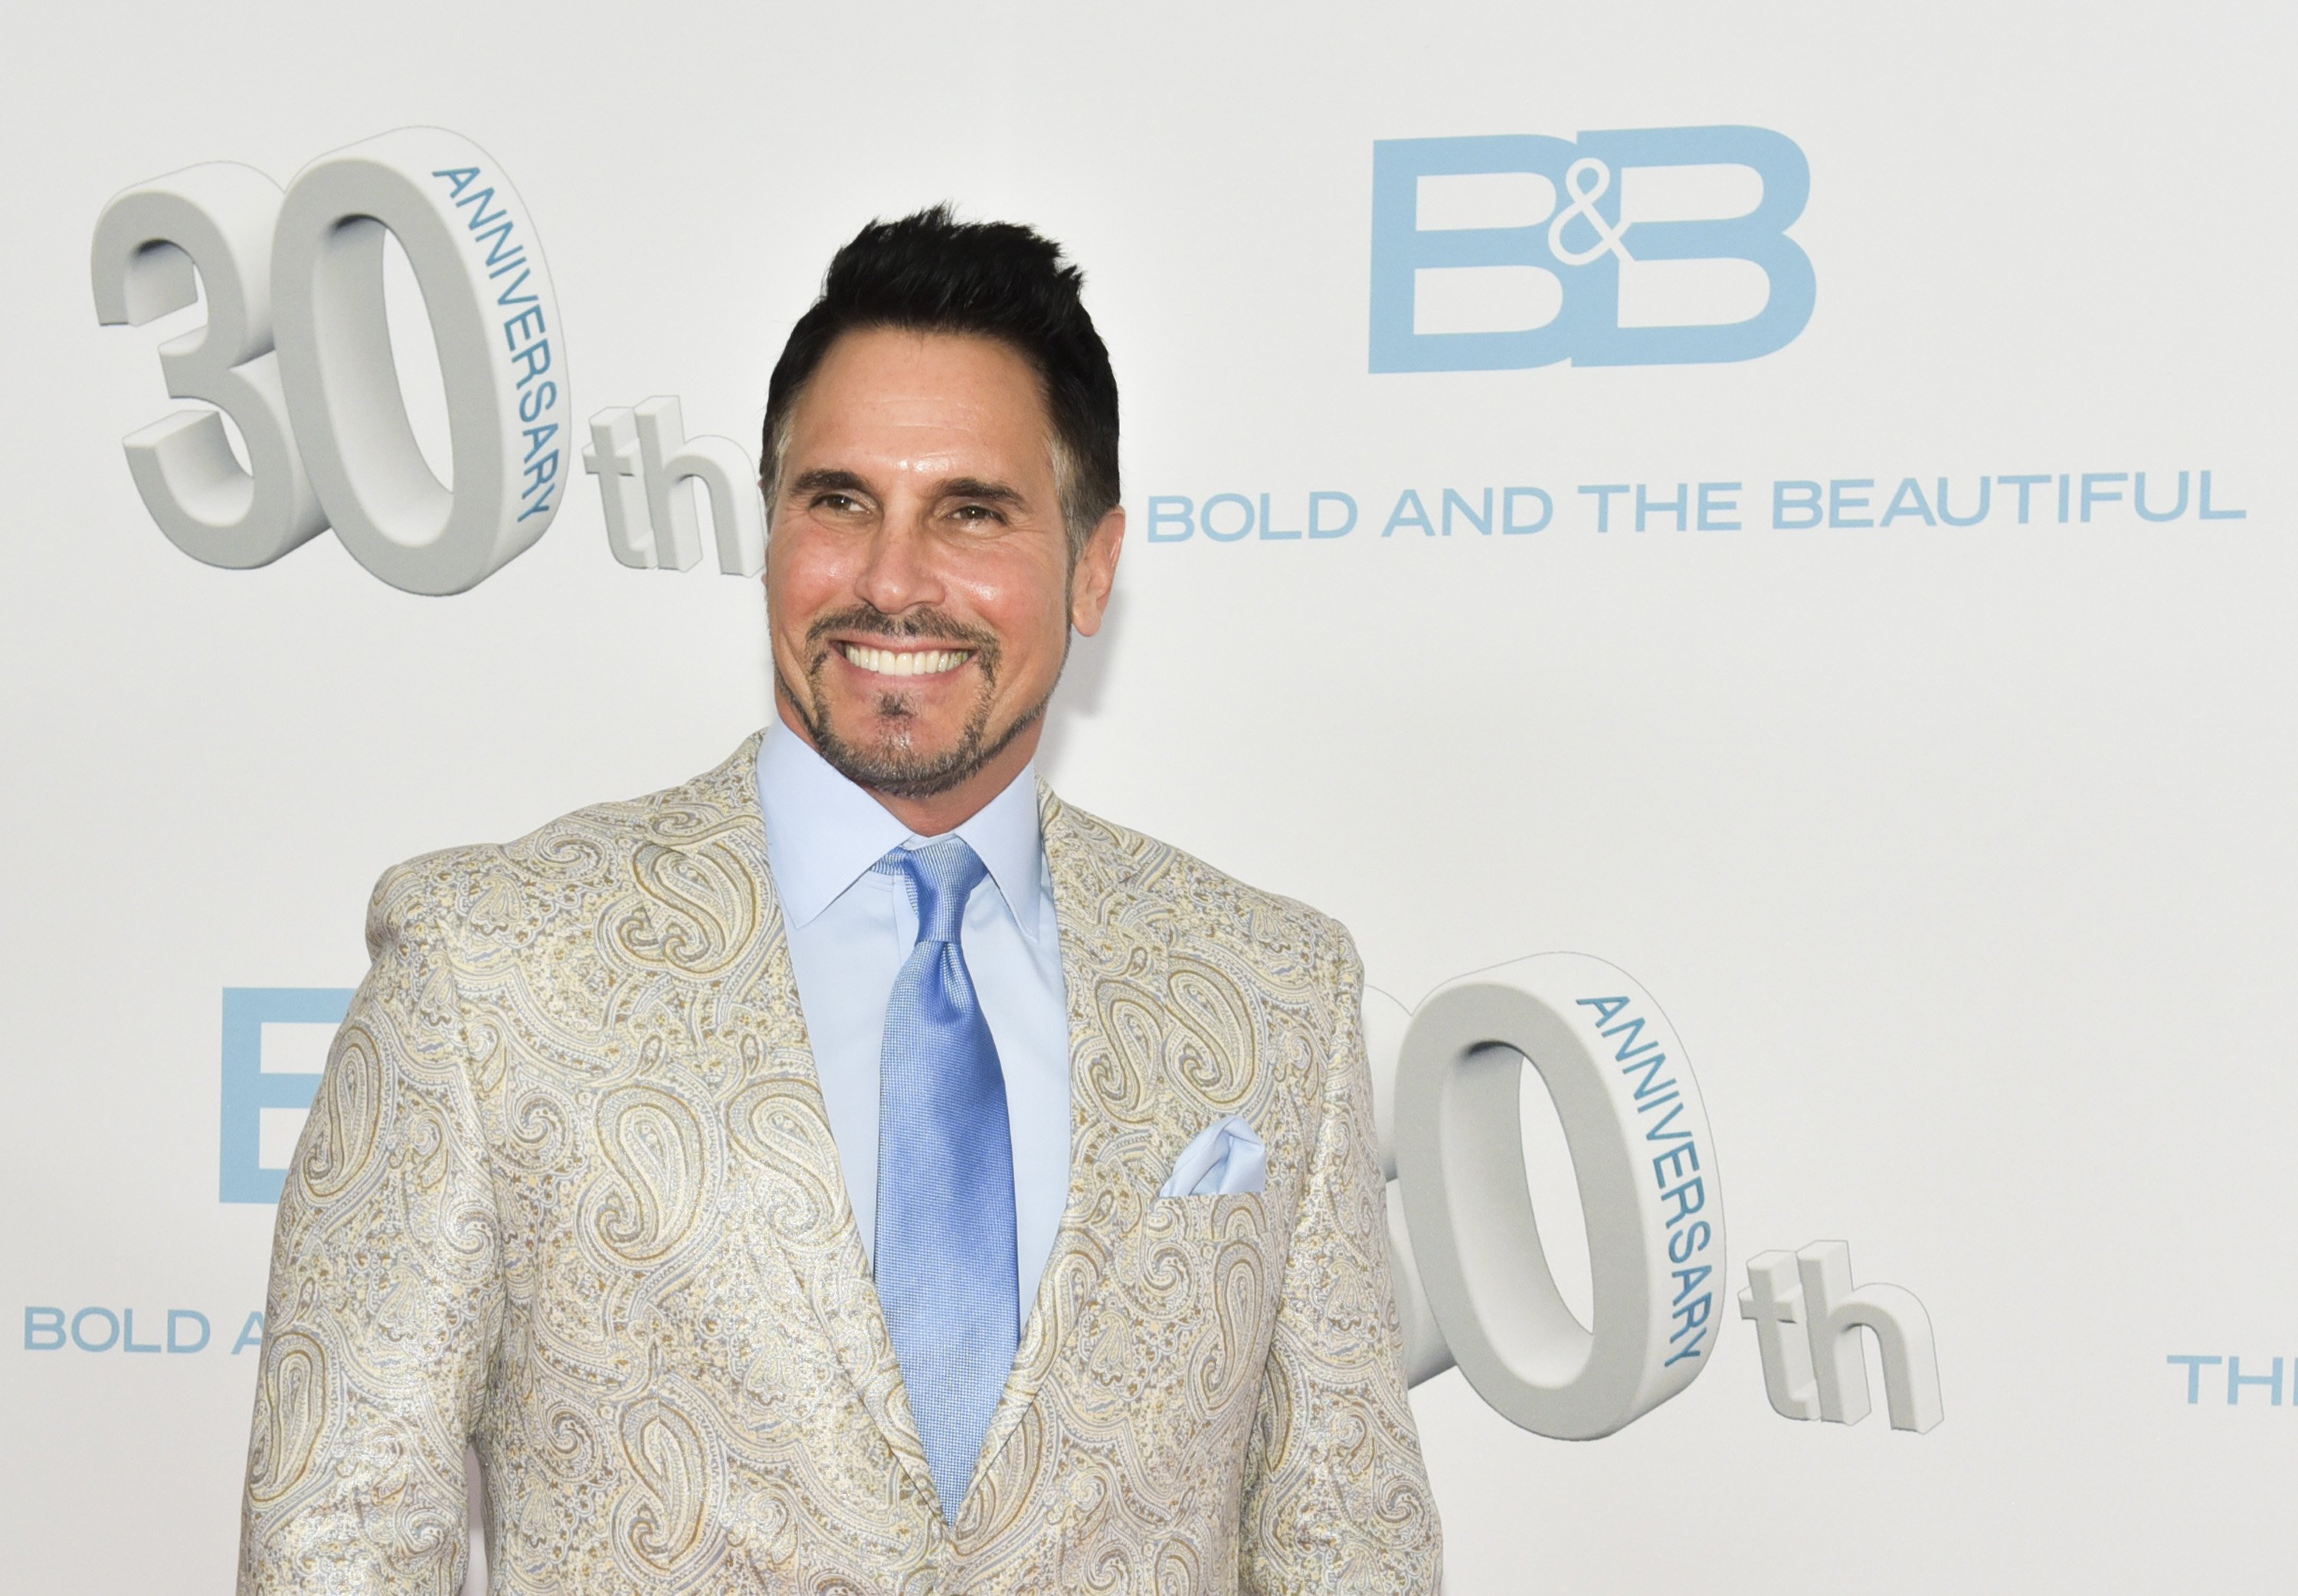 'The Bold and the Beautiful' star Don Diamont dressed in a white suit; posing on the red carpet.